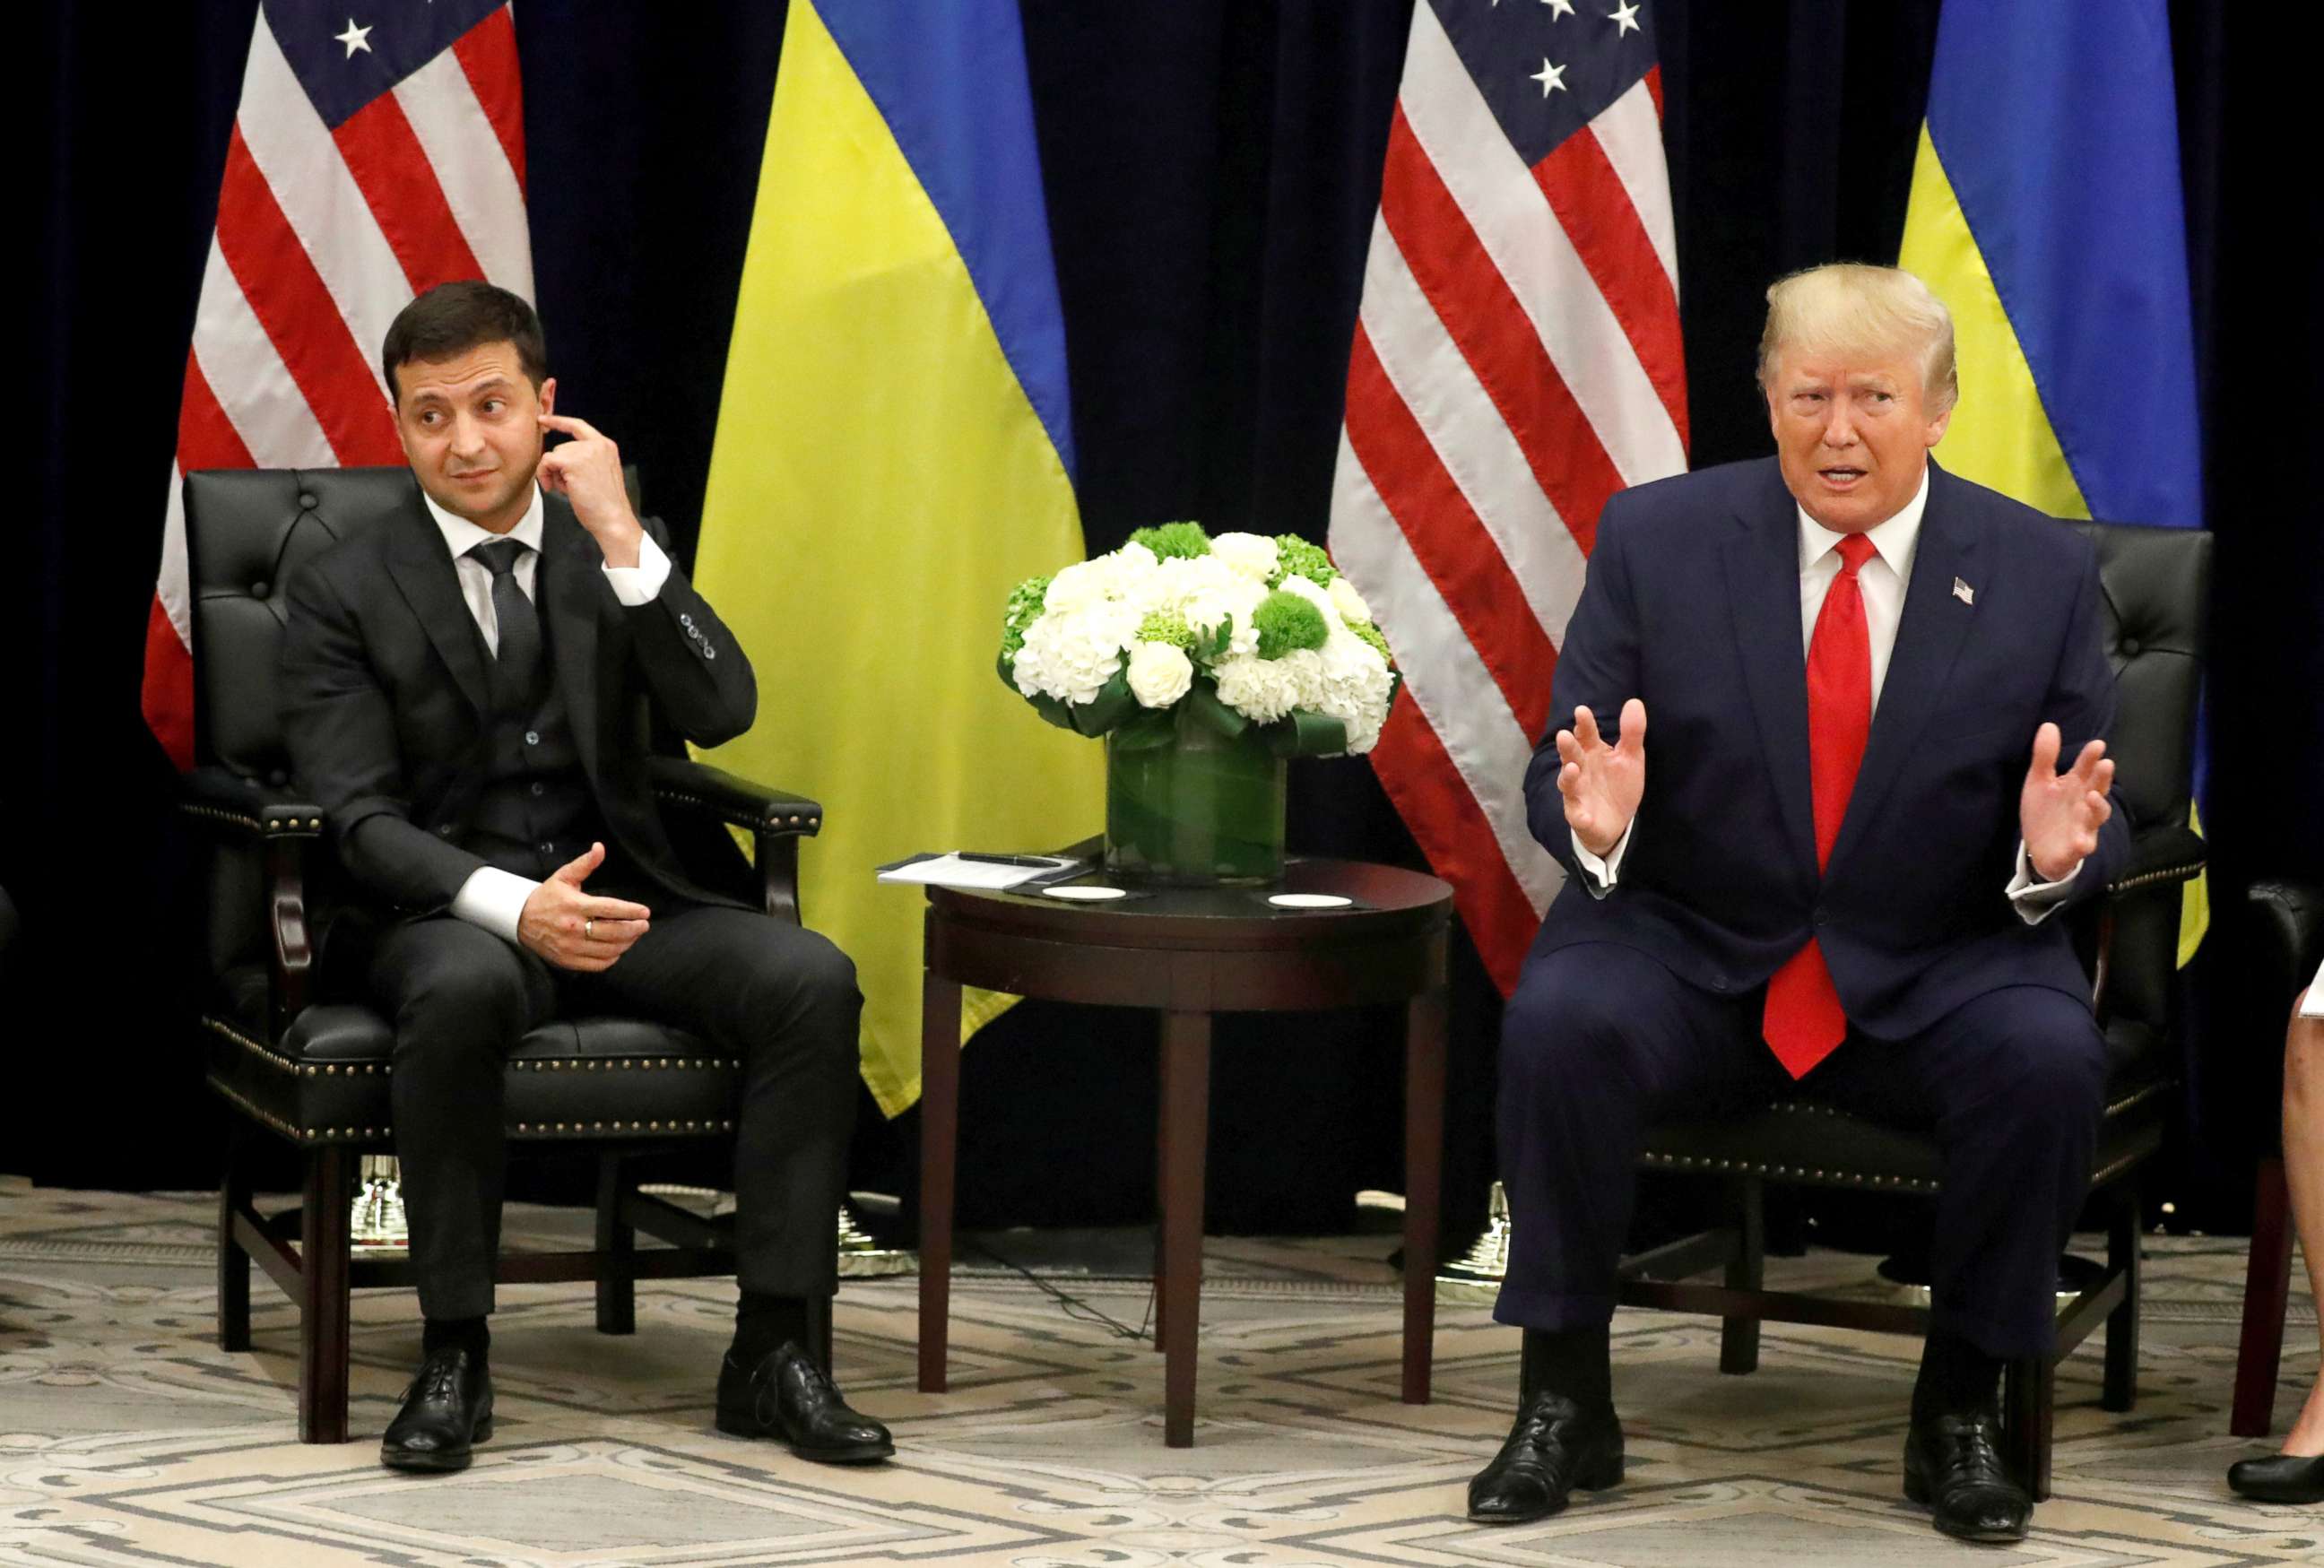 PHOTO: Ukraine's President Volodymyr Zelenskiy listens during a bilateral meeting with President Donald Trump at the United Nations General Assembly (UNGA) in New York City, Sept. 25, 2019.